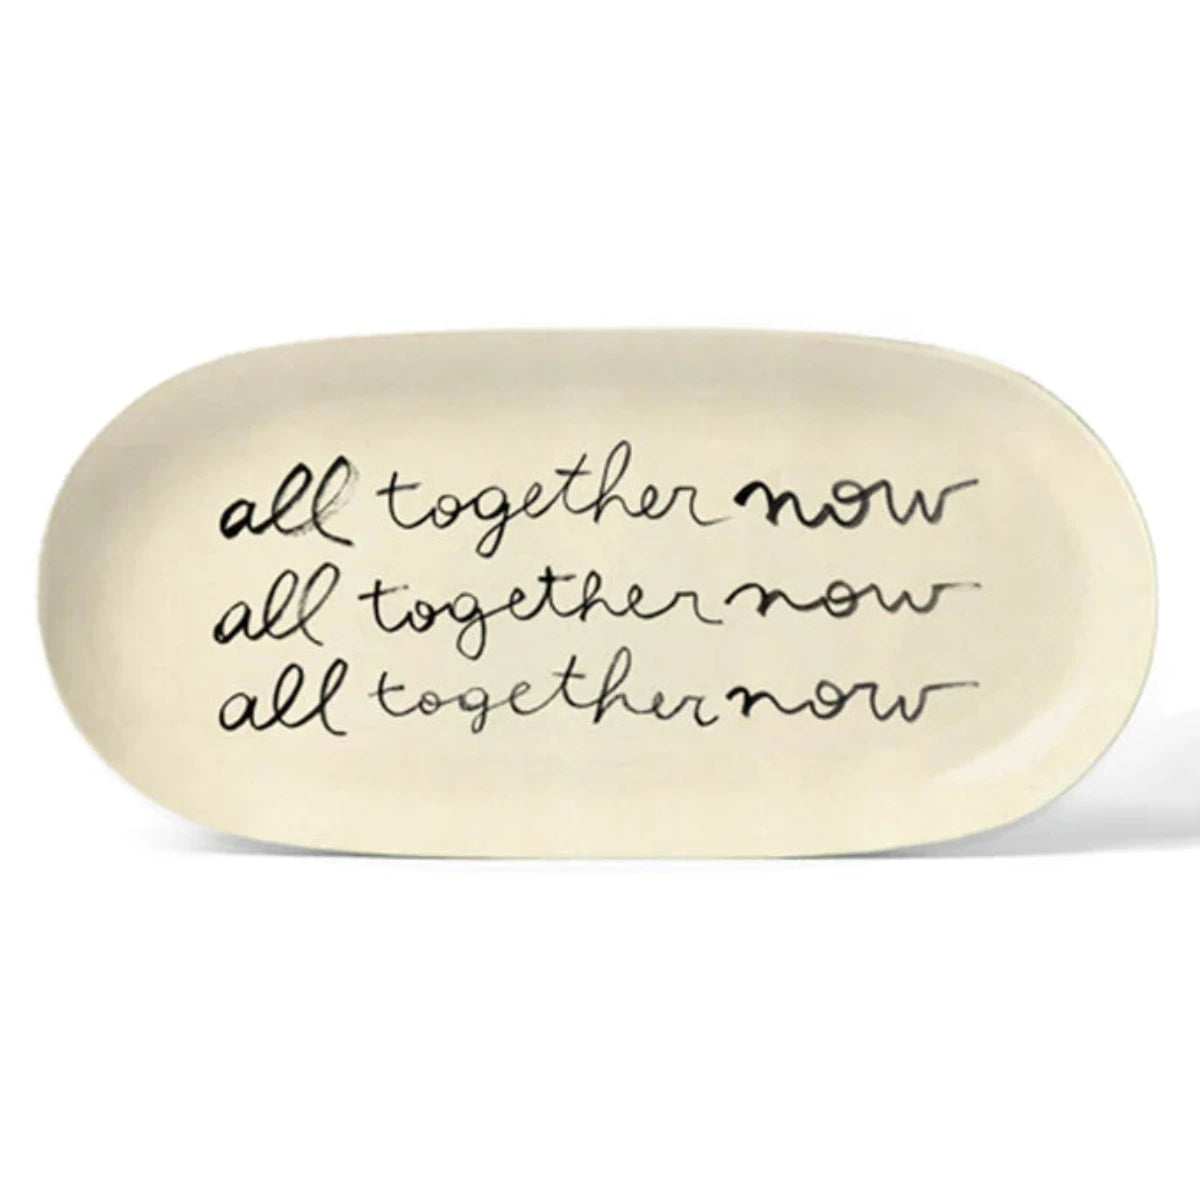 Enamel Printed Tray - "All Together Now"